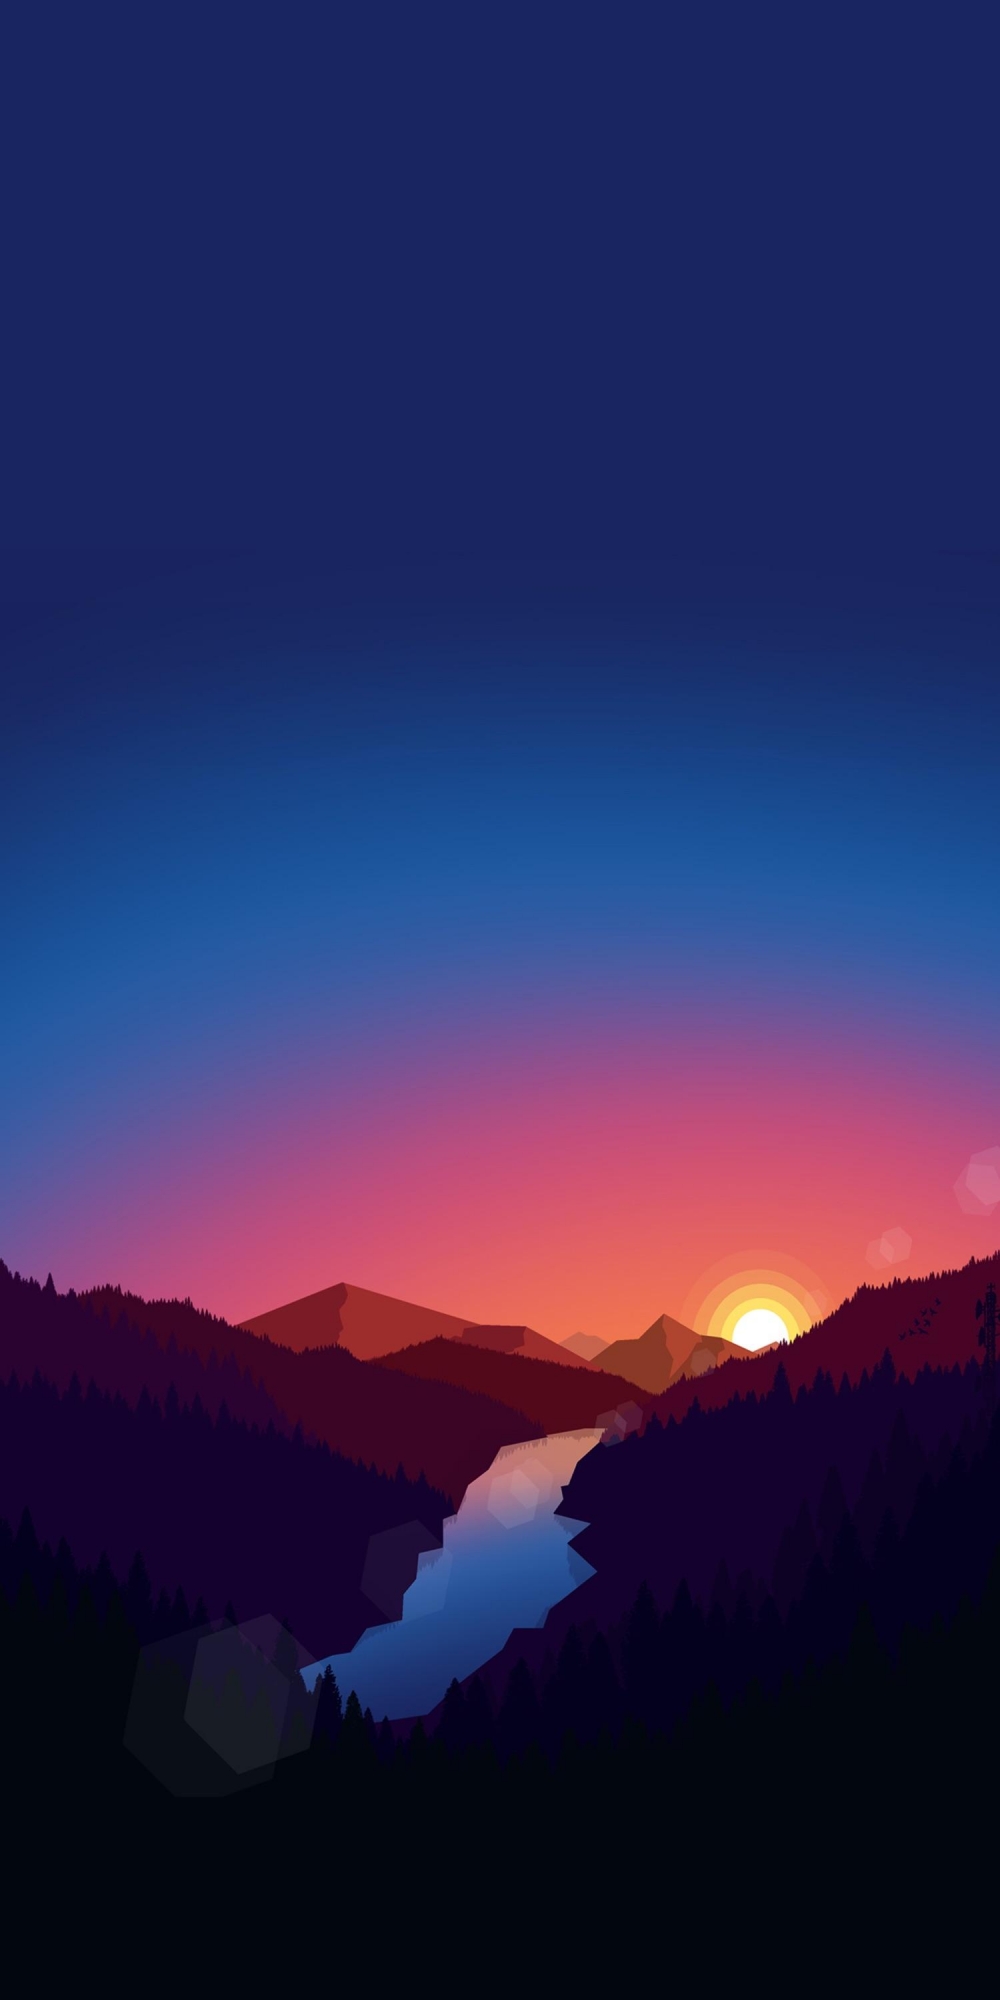 Sunset Animated wallpaper for Apple iPhone, Mac, iPad and more